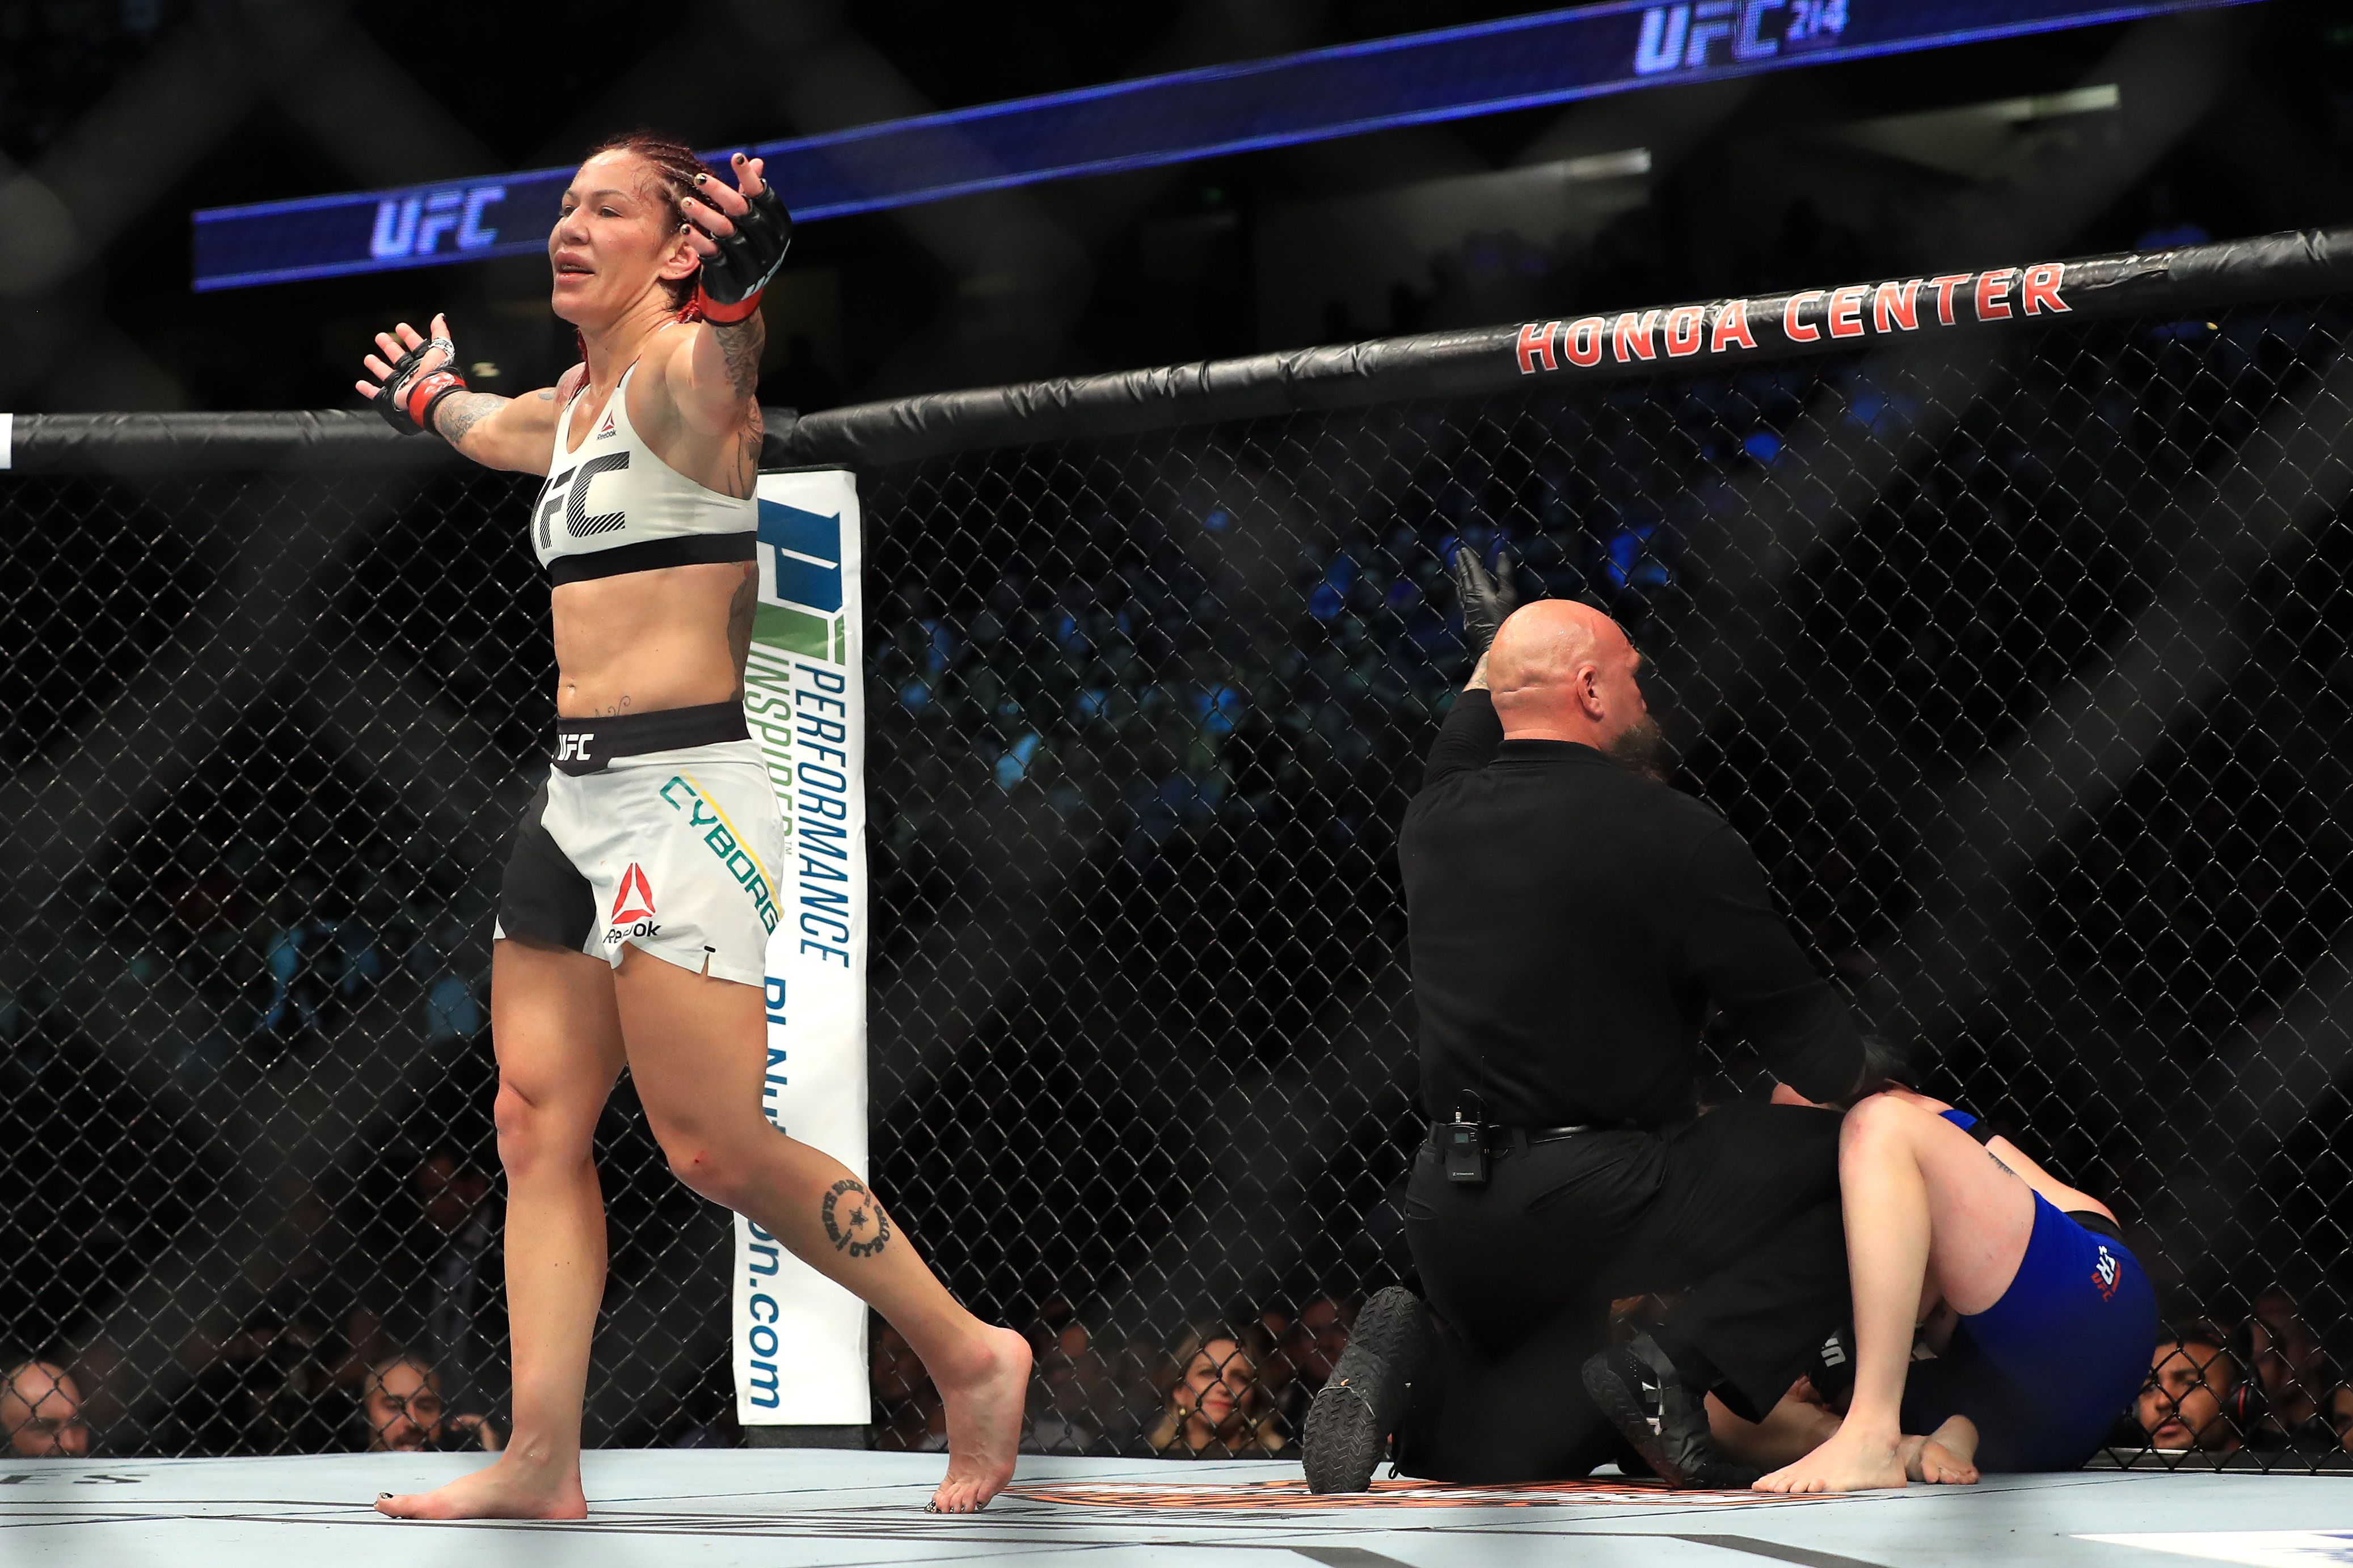 Who is the Richest Female MMA Fighter?